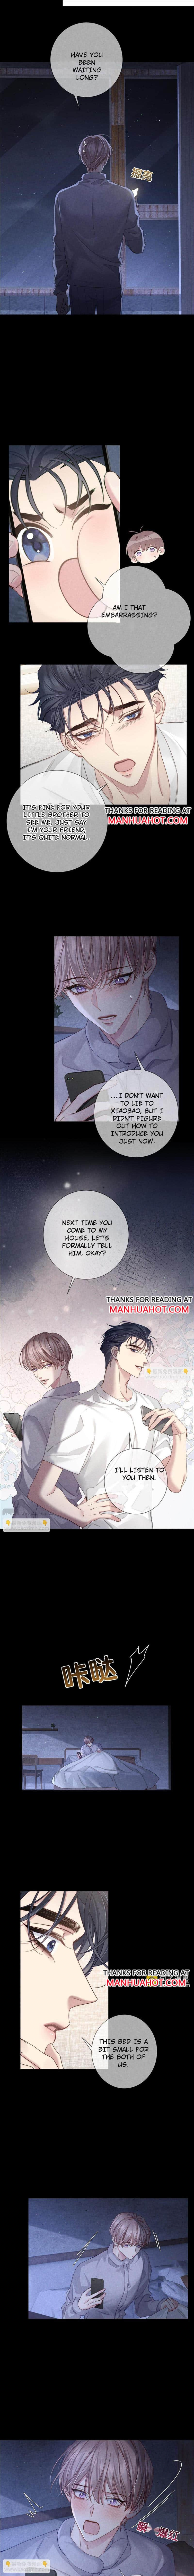 The Protagonist Just Wants To Falling In Love - chapter 131 - #2